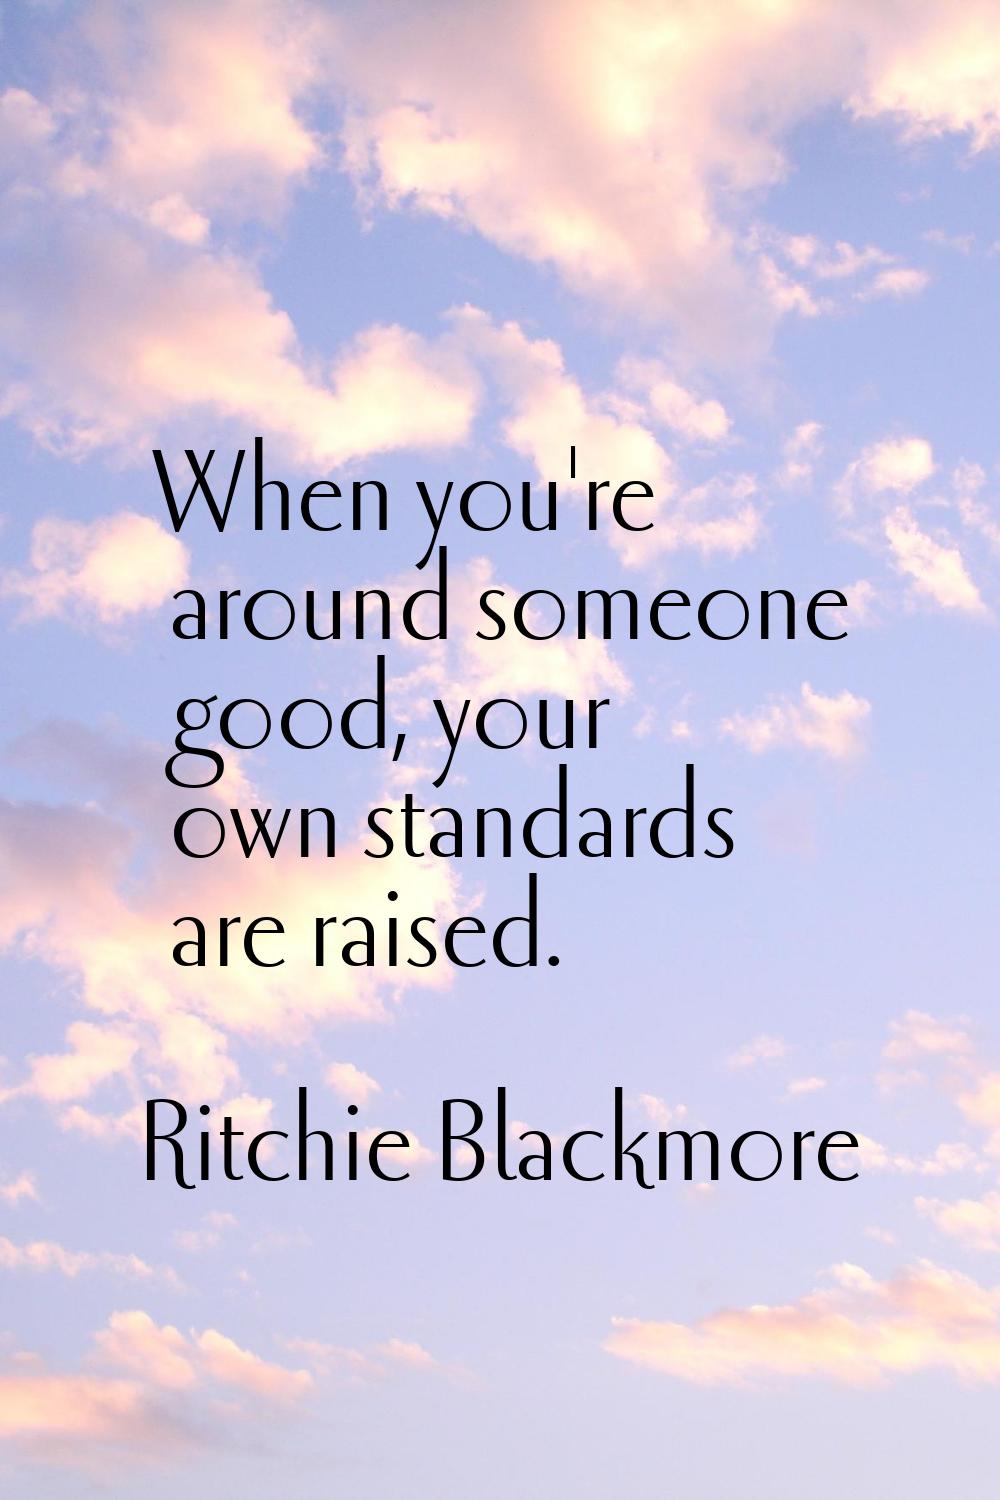 When you're around someone good, your own standards are raised.